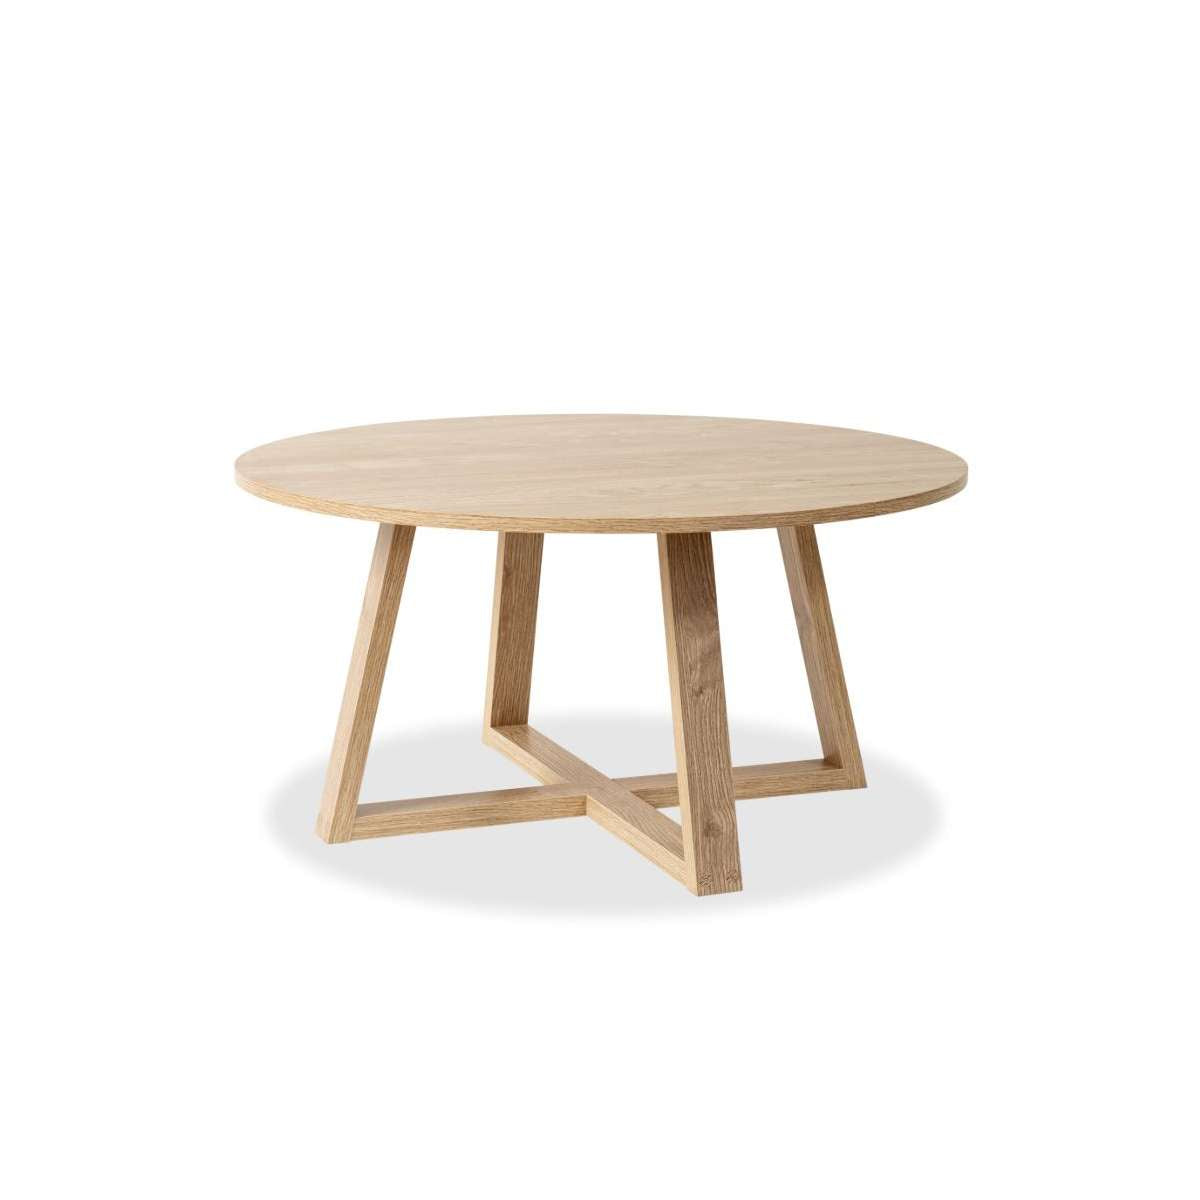 Kalley Coffee Table